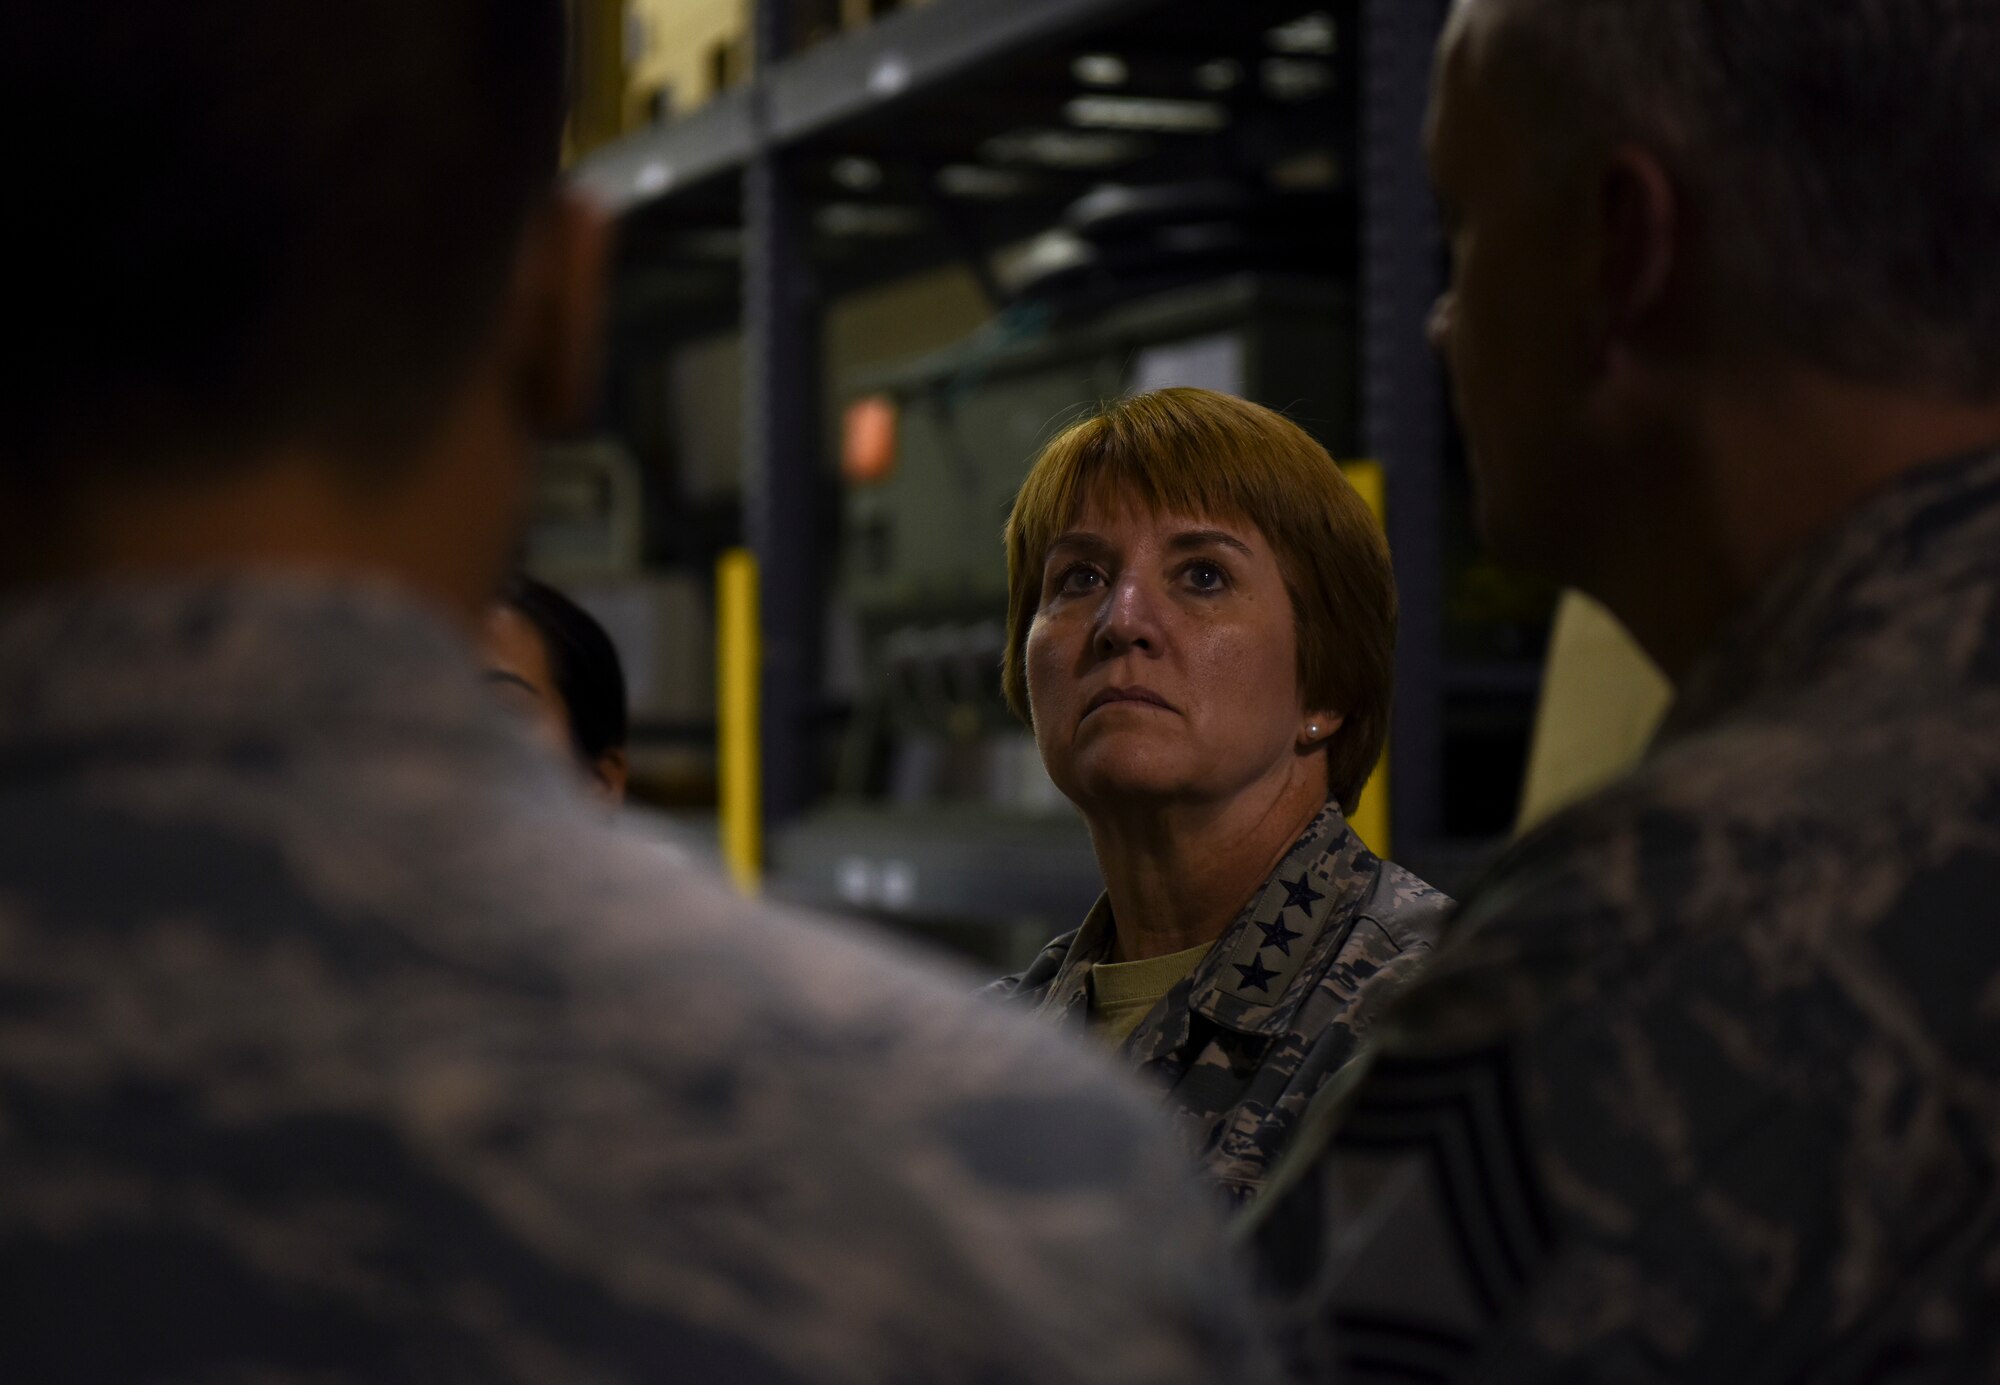 U.S. Air Force Lt. Gen. Dorothy Hogg, Air Force Surgeon General, inspects a war reserve material warehouse at Kunsan Air Base, Republic of Korea, Sept. 25, 2018. Gen. Hogg and Chief Master Sgt. George Cum, the Medical Enlisted Chief, met with Airmen of the medical group and received a brief on the capabilities and support provided to the 8th Fighter Wing and its mission. (U.S. Air Force photo by Senior Airman Savannah L. Waters)